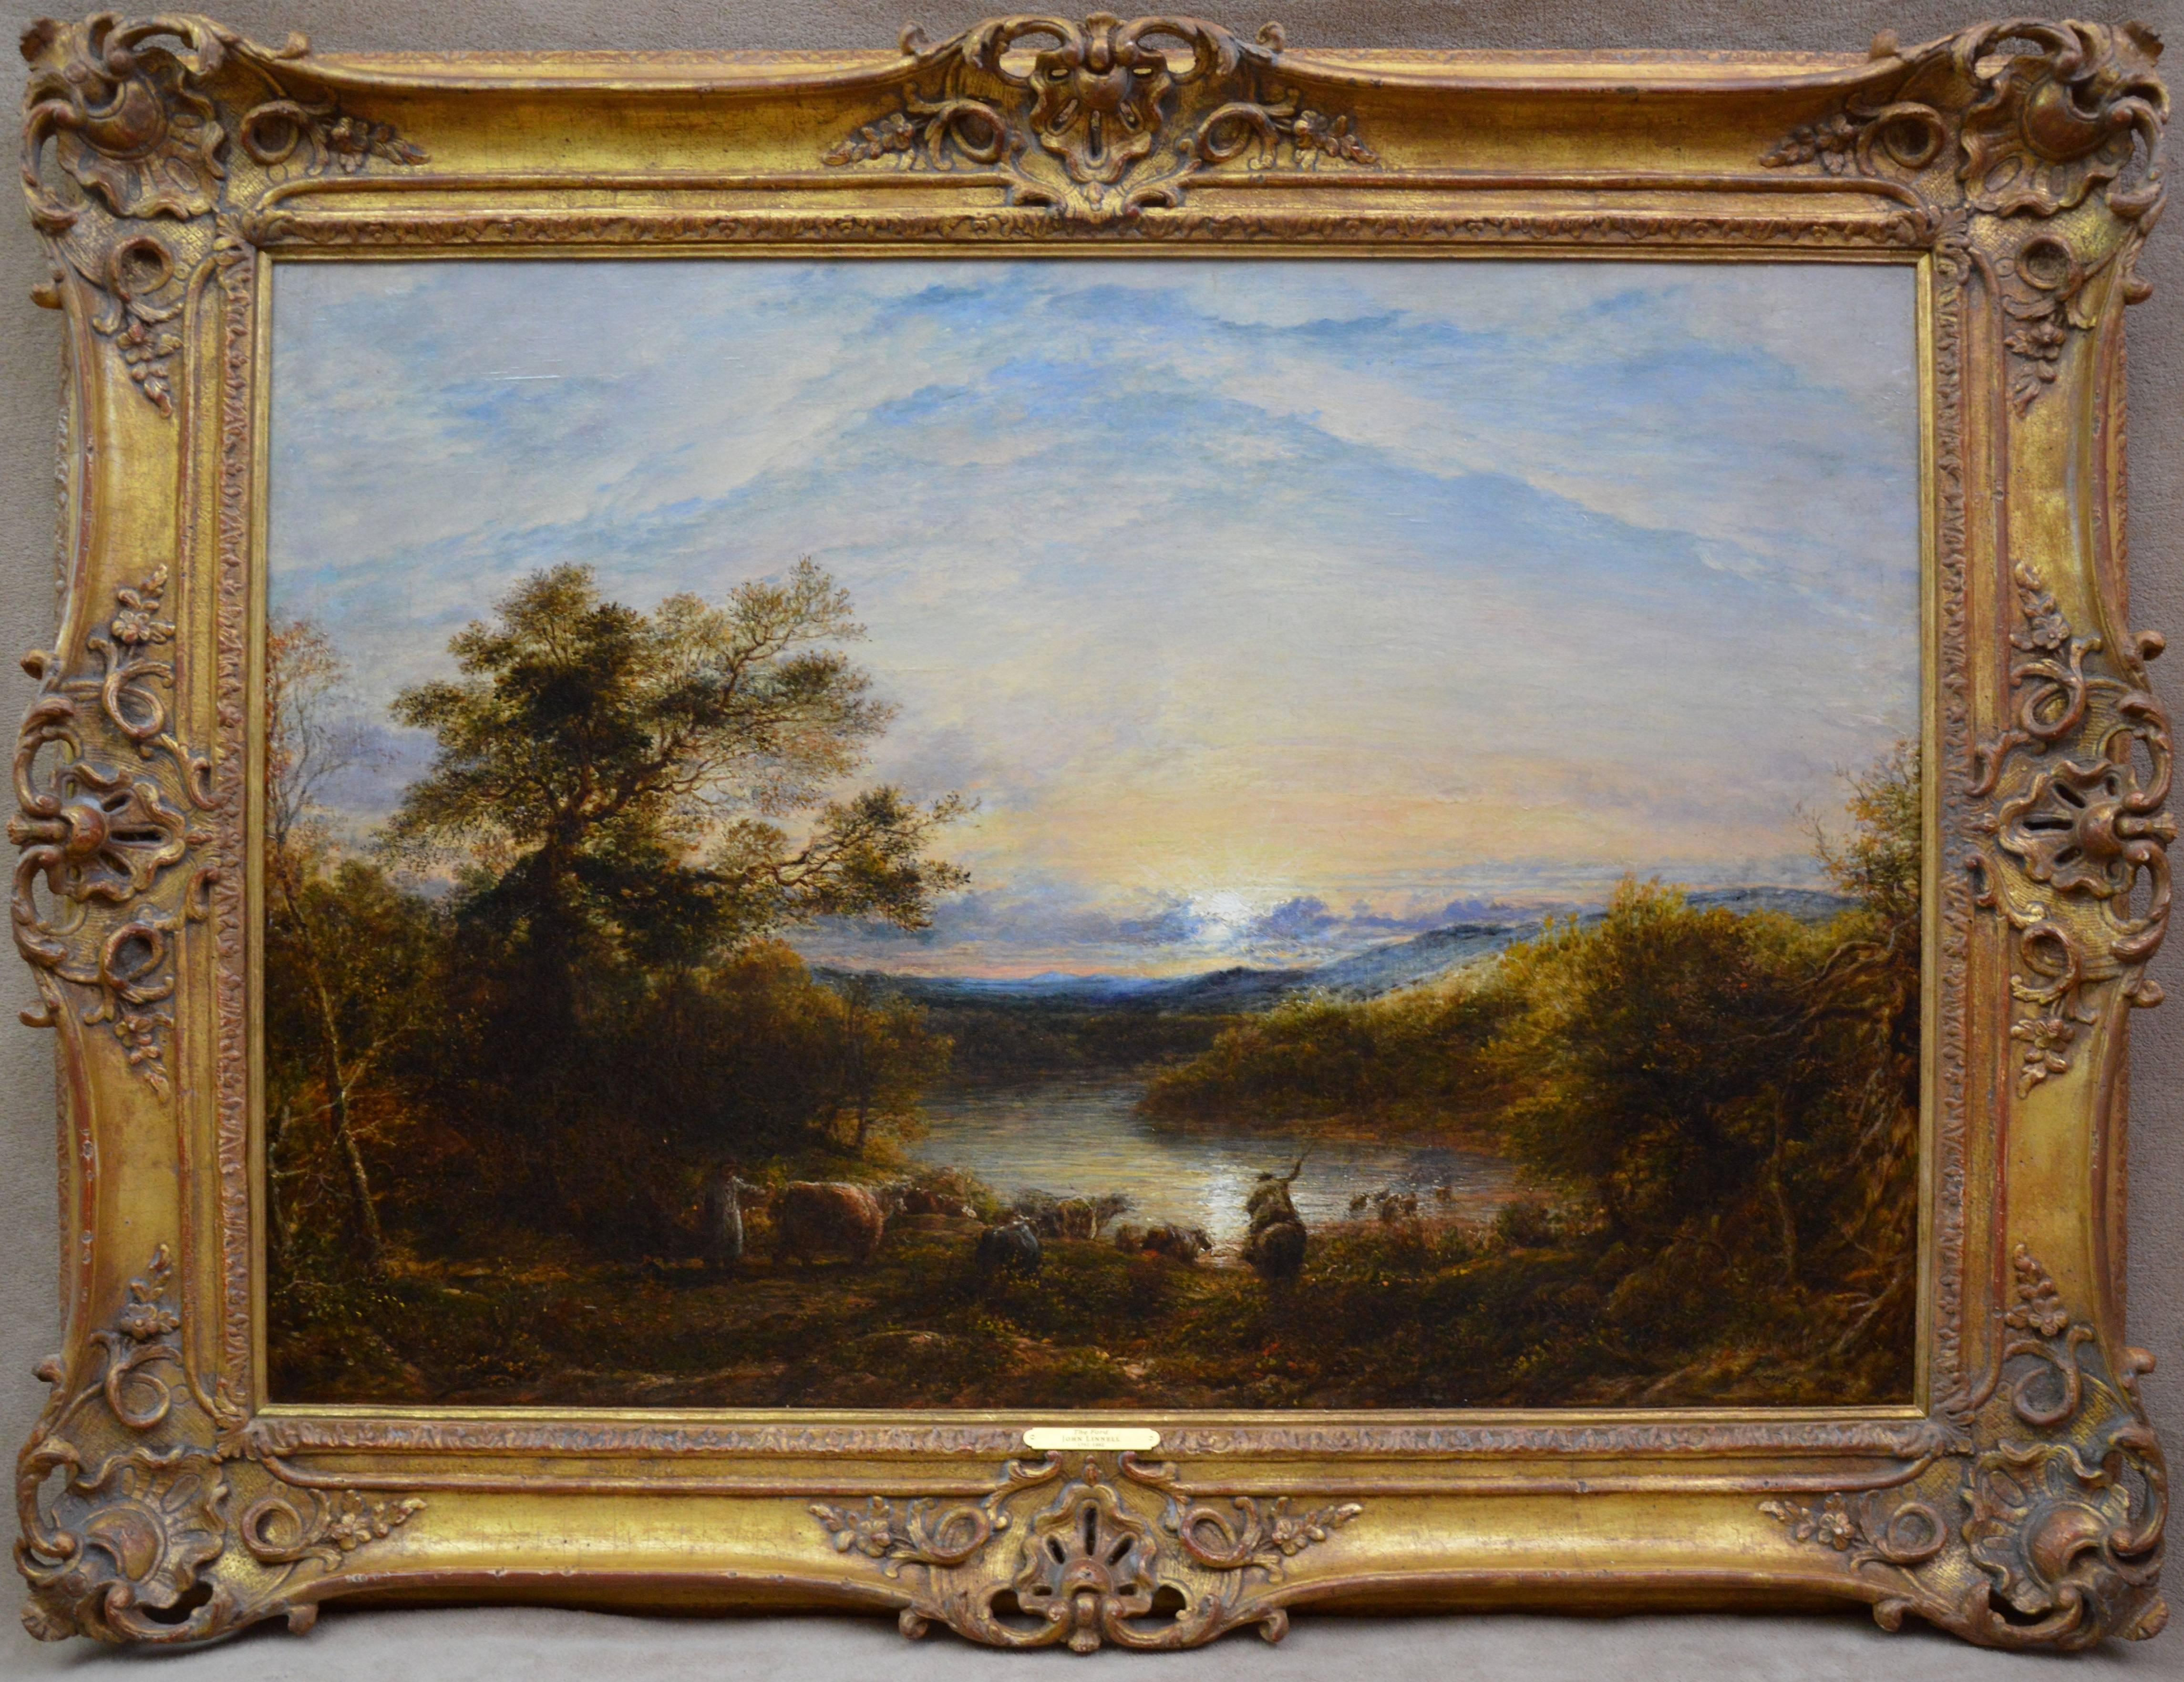 John Linnell (b.1792) Animal Painting - The Ford - Large 19th Century Oil Painting - John Linnell - Victorian Landscape